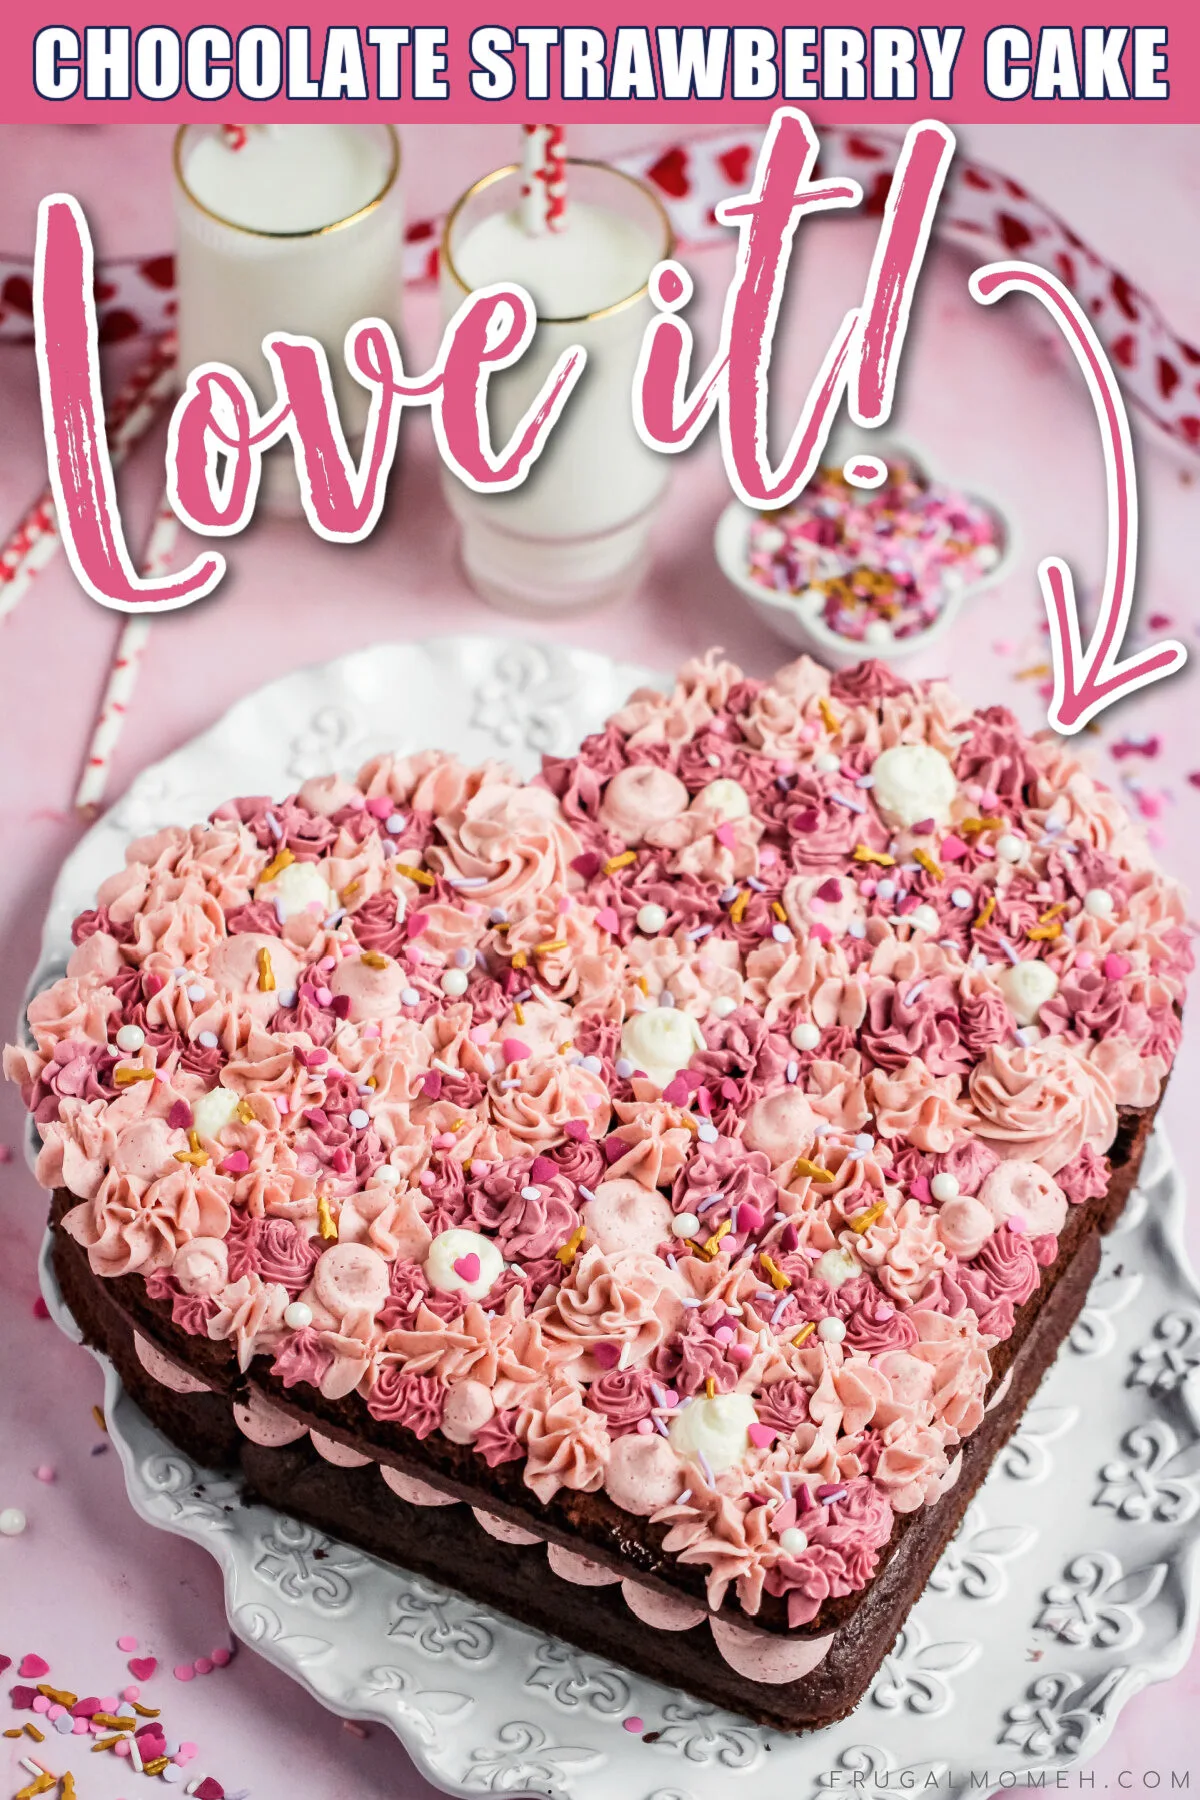 We Love the Wilton Heart-Shaped Cake Pan on  Prime